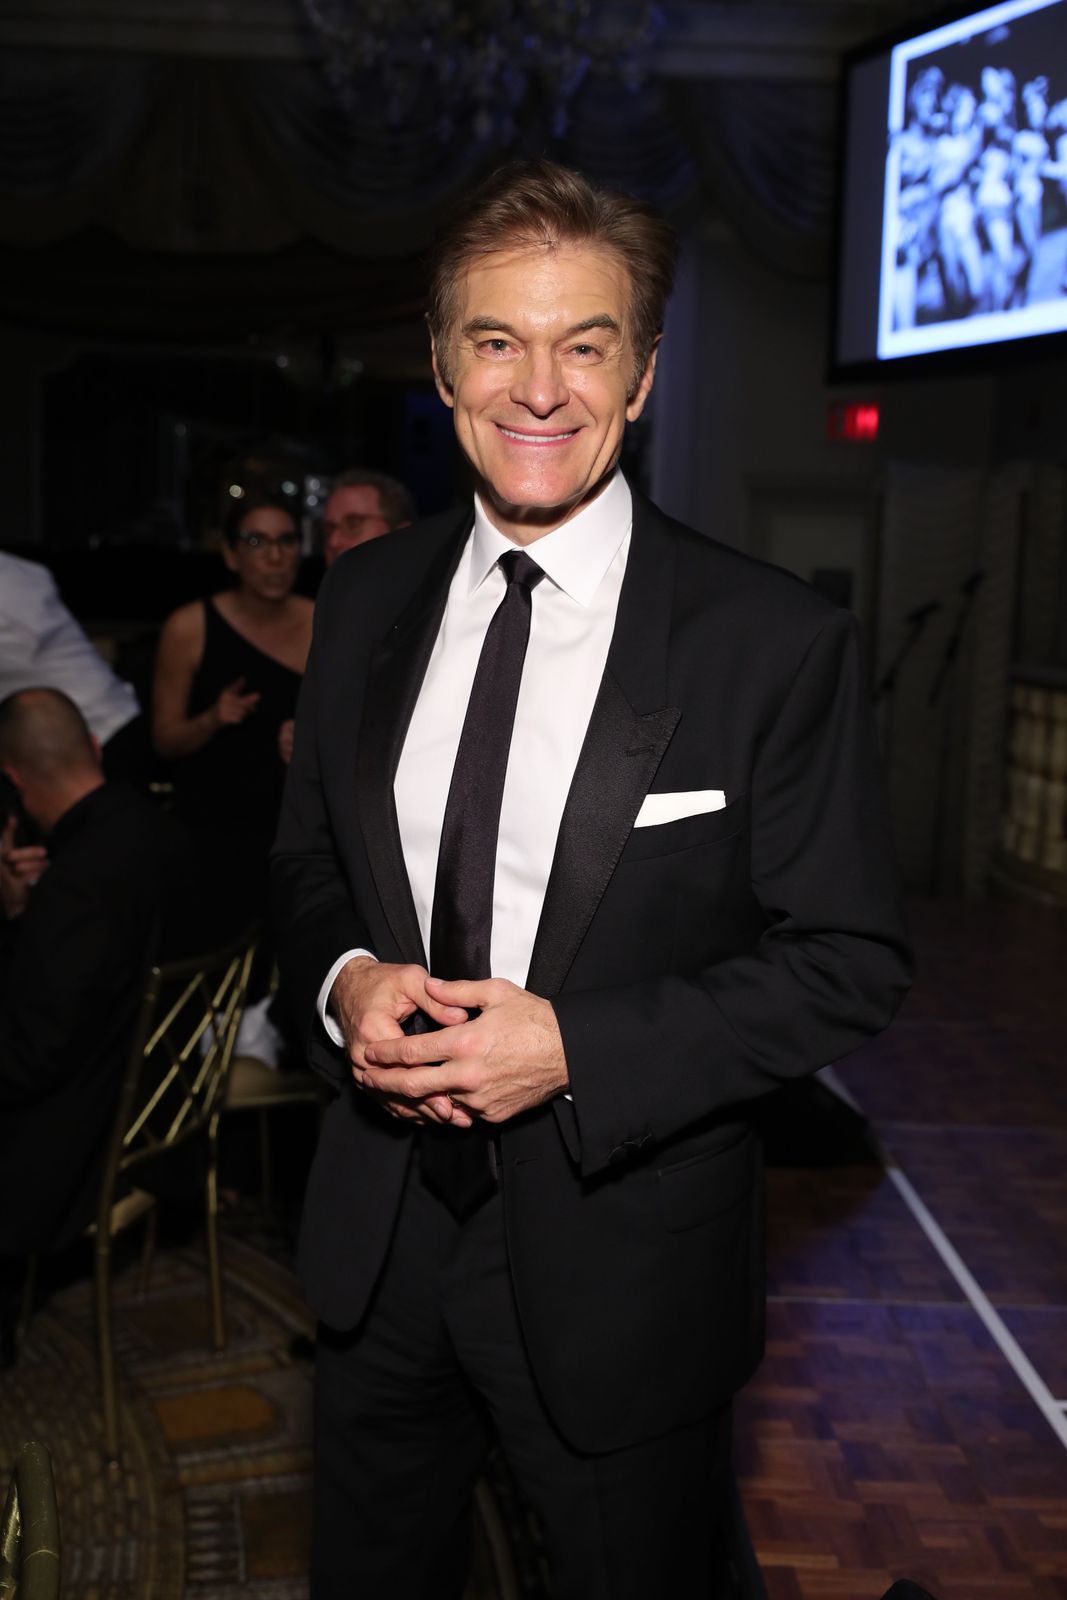 Mehmet Oz at the 7th Annual Order Of The Golden Sphinx Gala at The Pierre, A Taj Hotel on April 15, 2019 | Photo: Getty Images